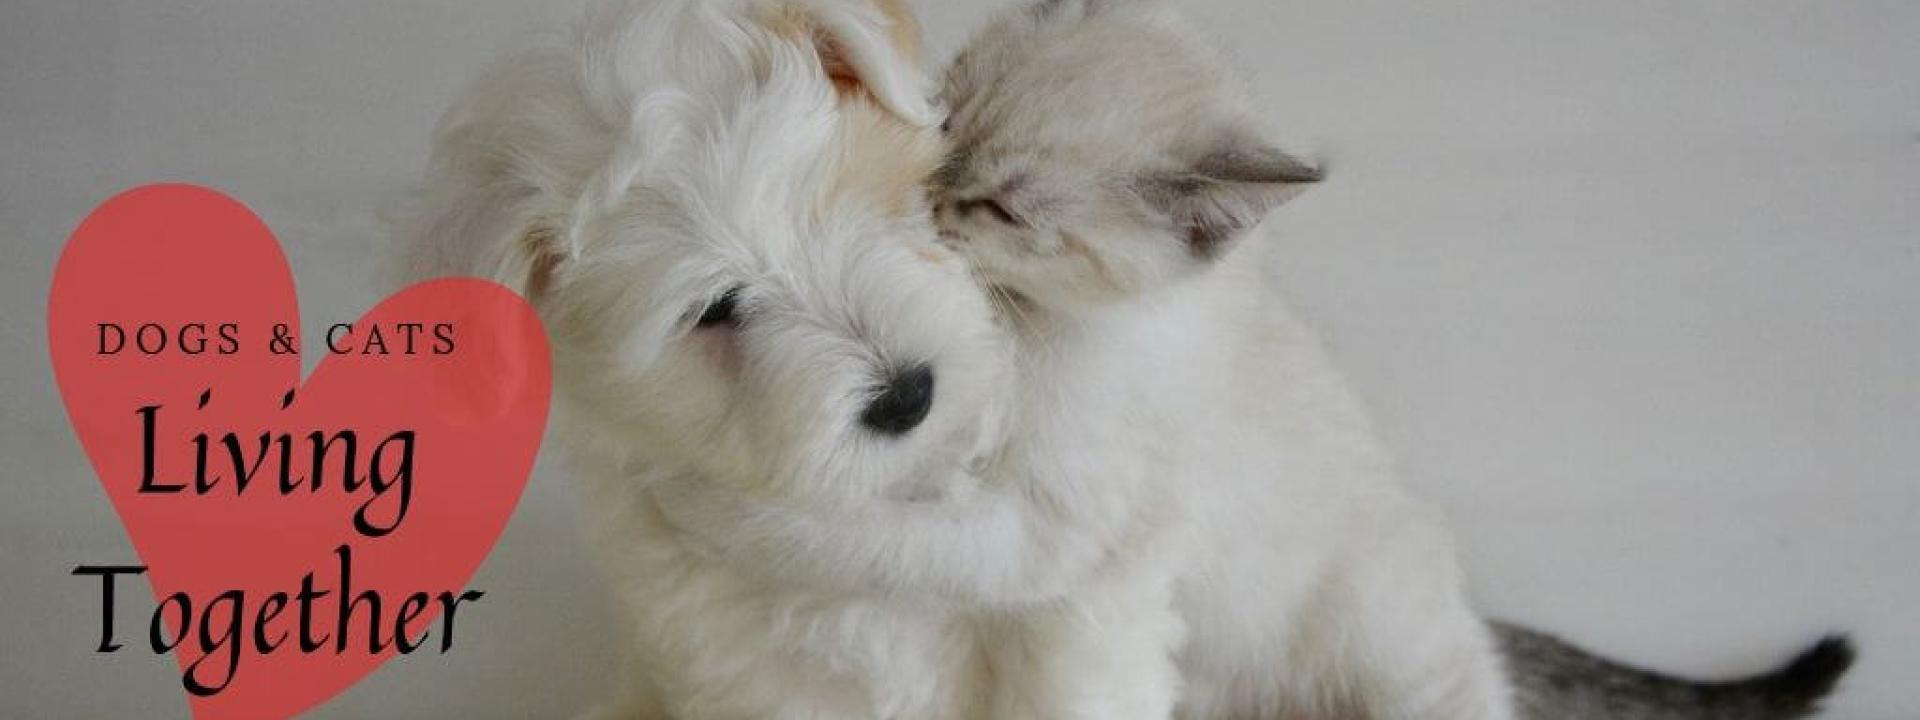 dogs-and-cats-together-blog-header.jpg